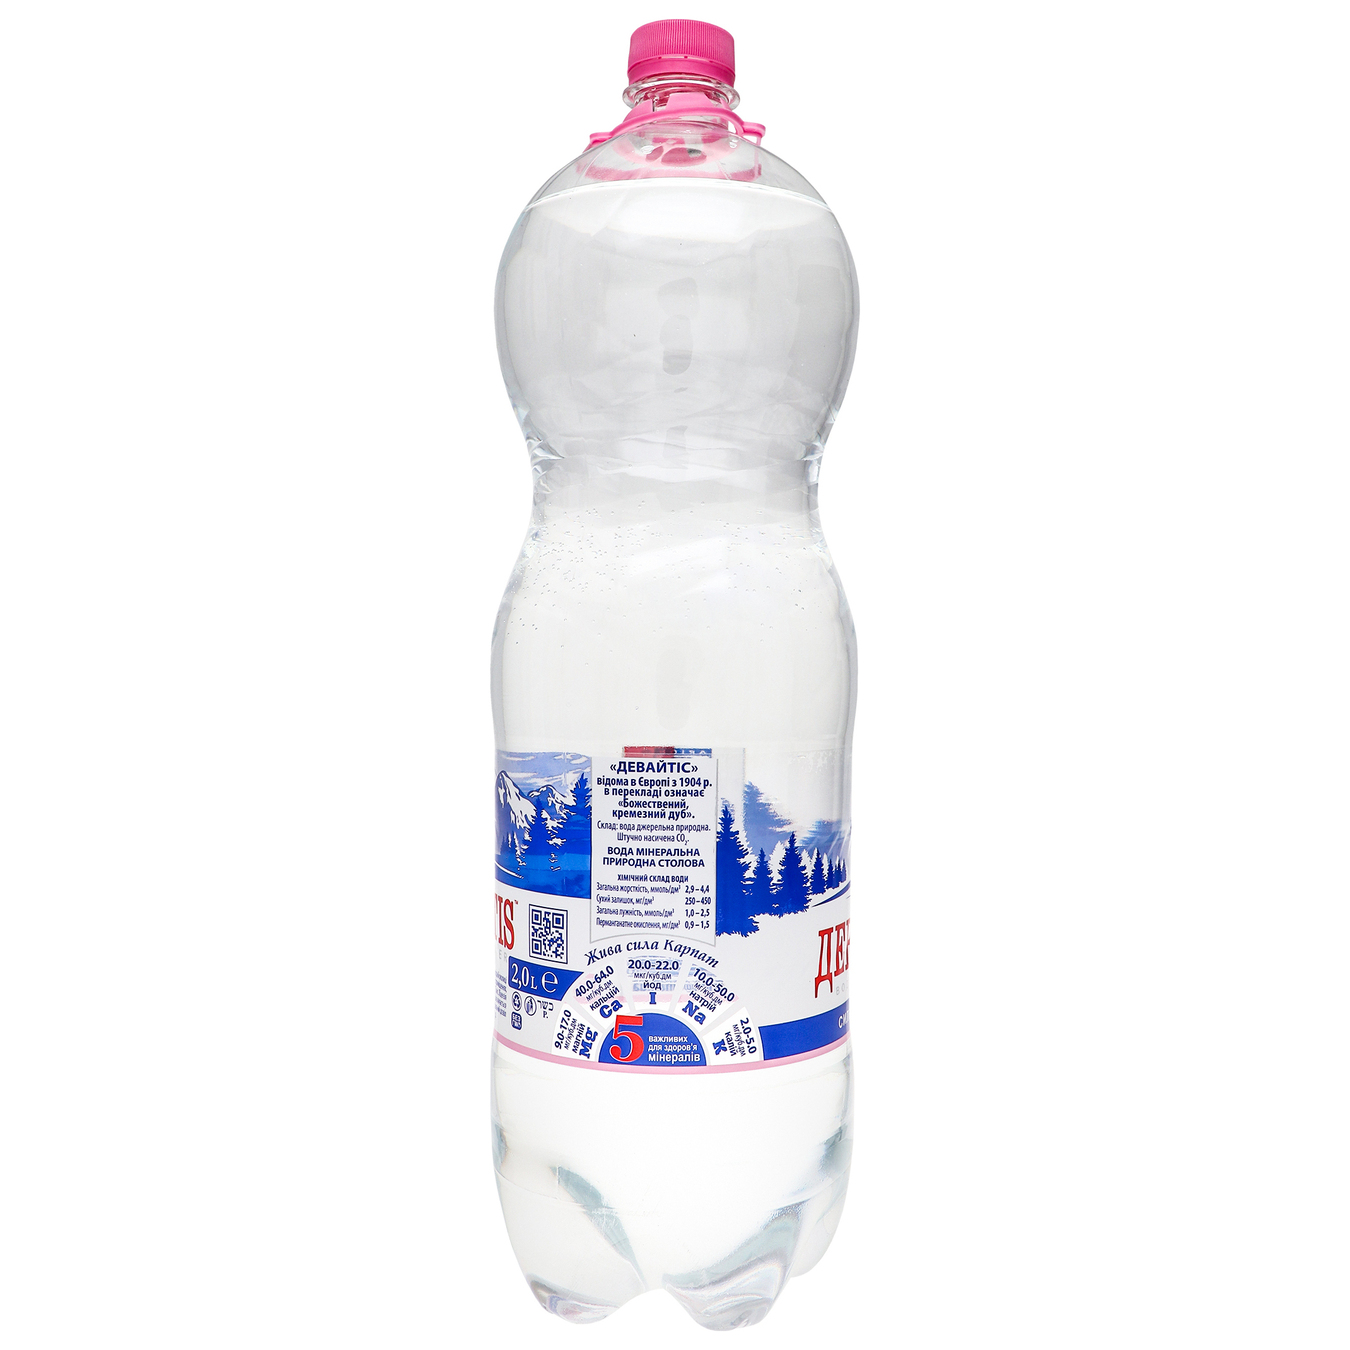 Devaitis strongly carbonated water 2liters 3